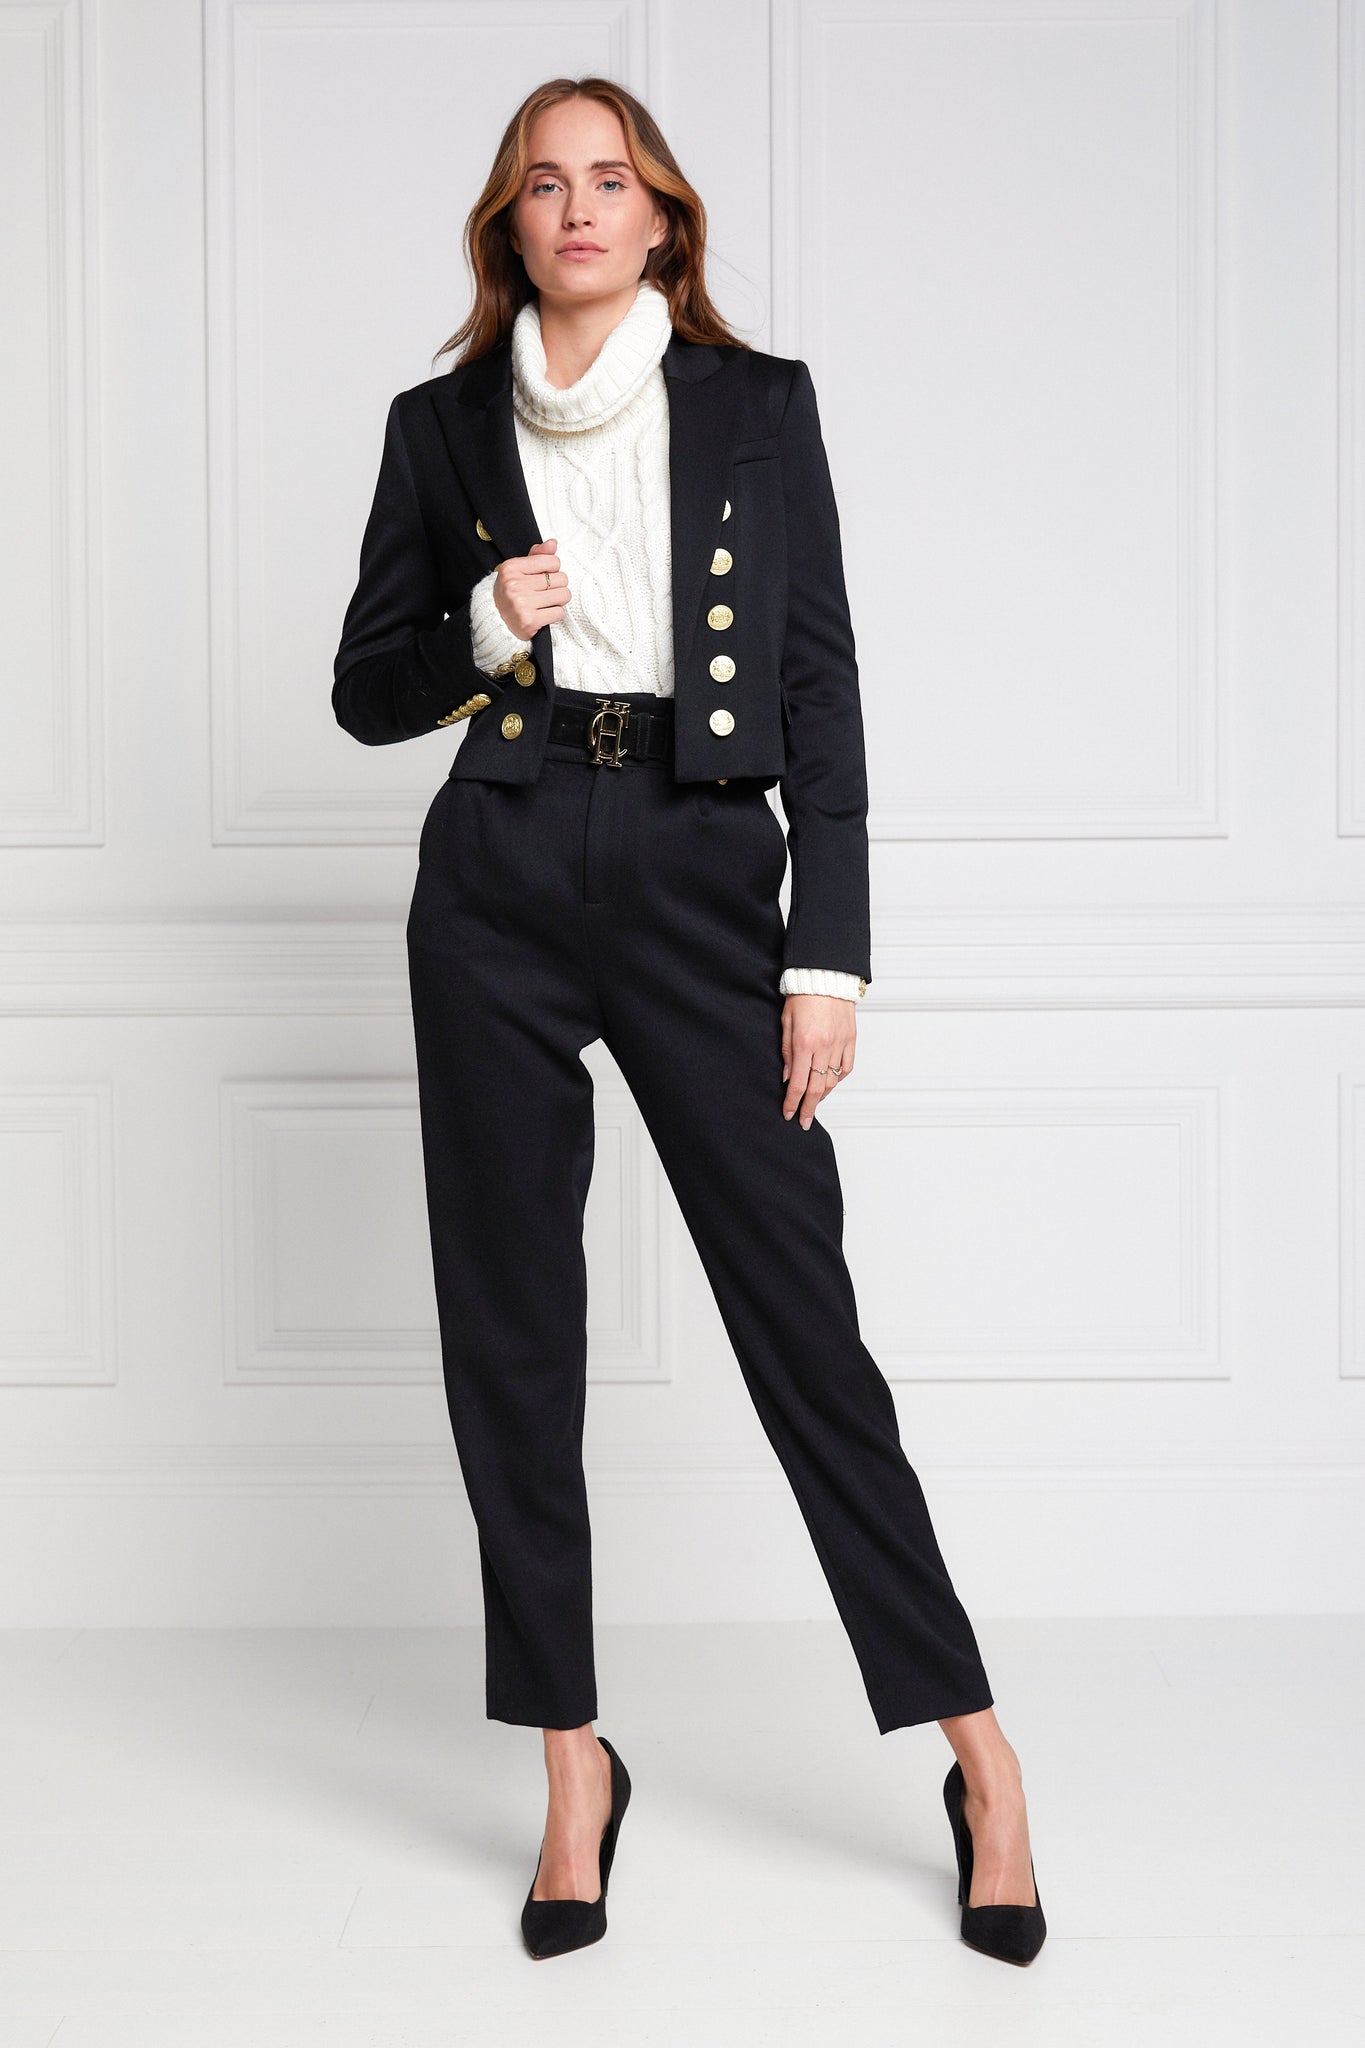 British made tailored cropped jacket in black with welt pockets and gold button detail down the front and on sleeves worn with white roll neck jumper and black tailored trousers